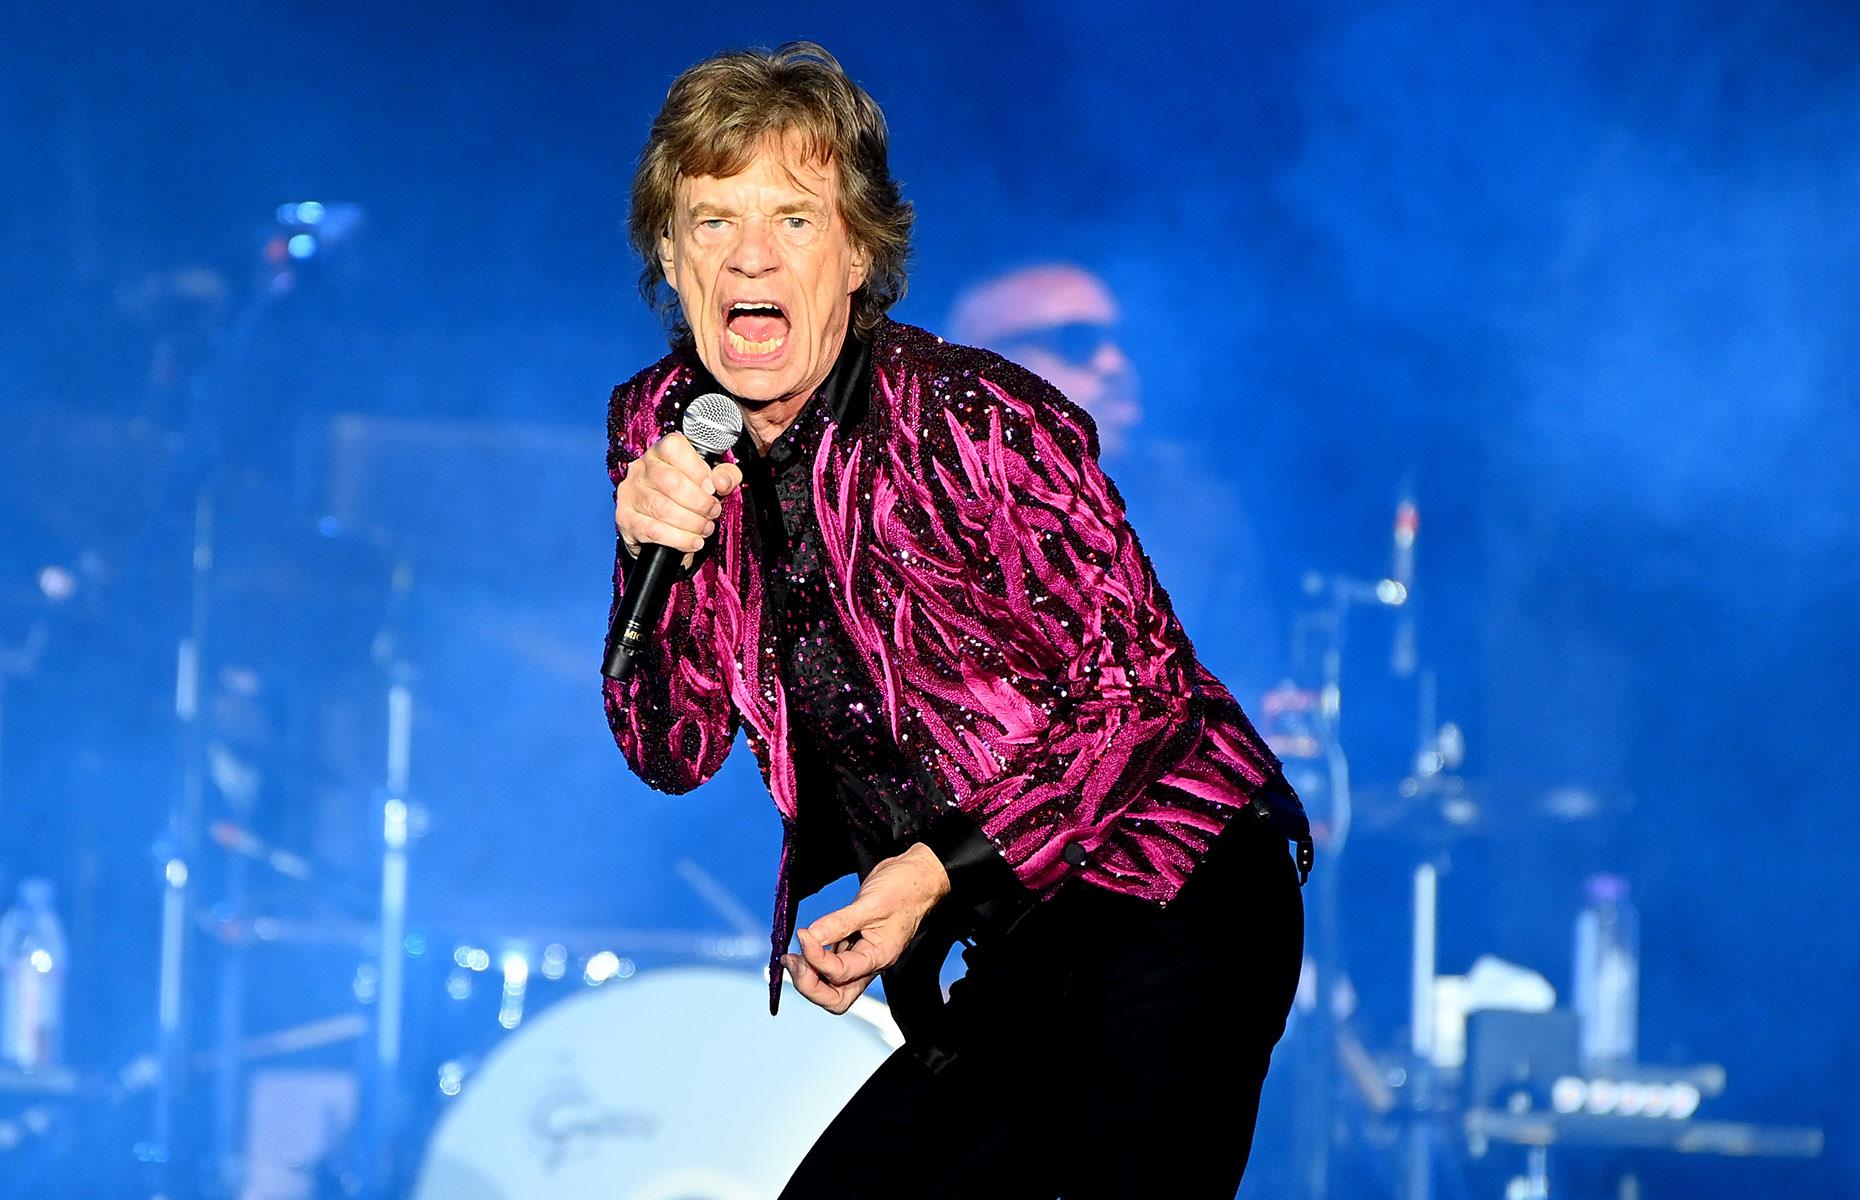 <p>The Rolling Stones' <em>No Filter Tour</em>, which began in 2017 and concluded in 2021, was a testament to the band's enduring legacy and their ability to captivate audiences across generations – even in the face of profound loss. The tour, which was briefly paused due to COVID-19, saw the legendary rock icons play 58 shows across Europe and North America.</p>  <p>This was made all the more remarkable by the fact that during the September-November 2021 leg of the tour, the band members were mourning the loss of their beloved drummer, Charlie Watts, who had passed away in August of that year. The <em>No Filter Tour</em> attracted just under three million fans, and grossed $546.5 million, a tidy $653 million in 2024 money.</p>  <p>But it's far from the highest-grossing tour the Stones have embarked on...</p>